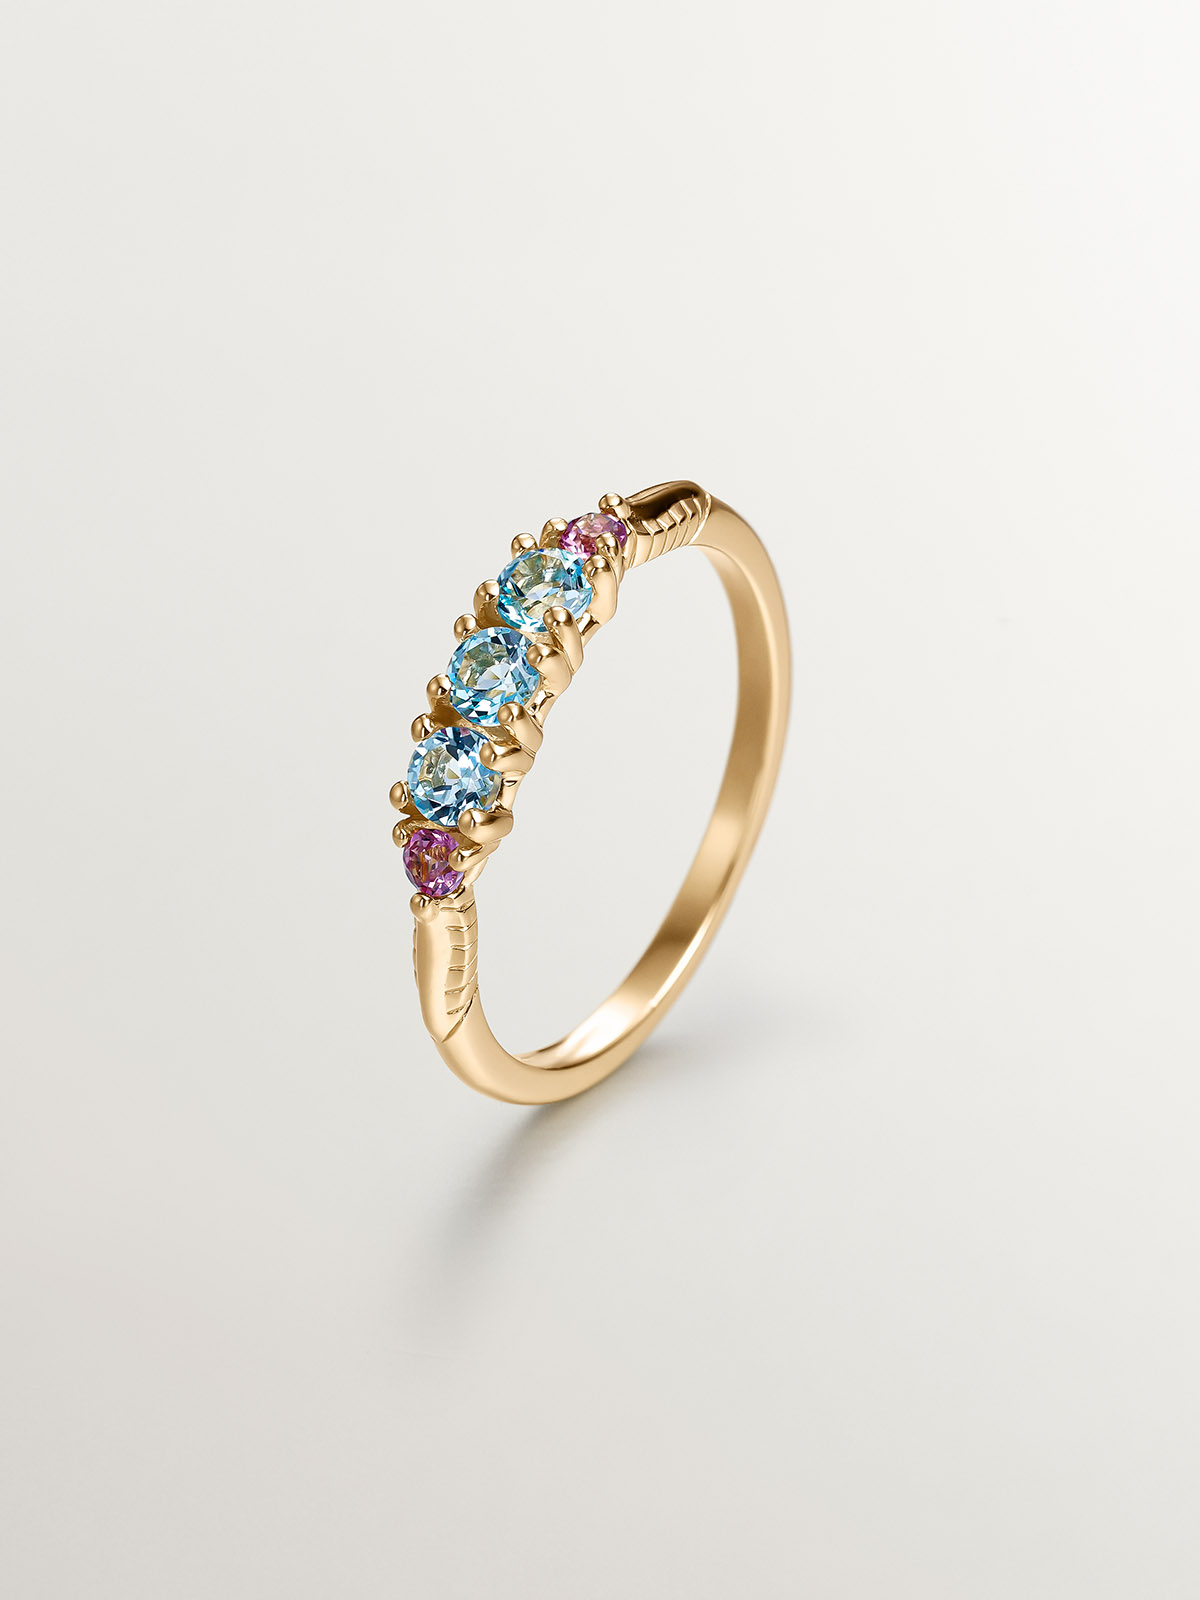 925 Silver ring bathed in 18K yellow gold with topaz and rhodolites.